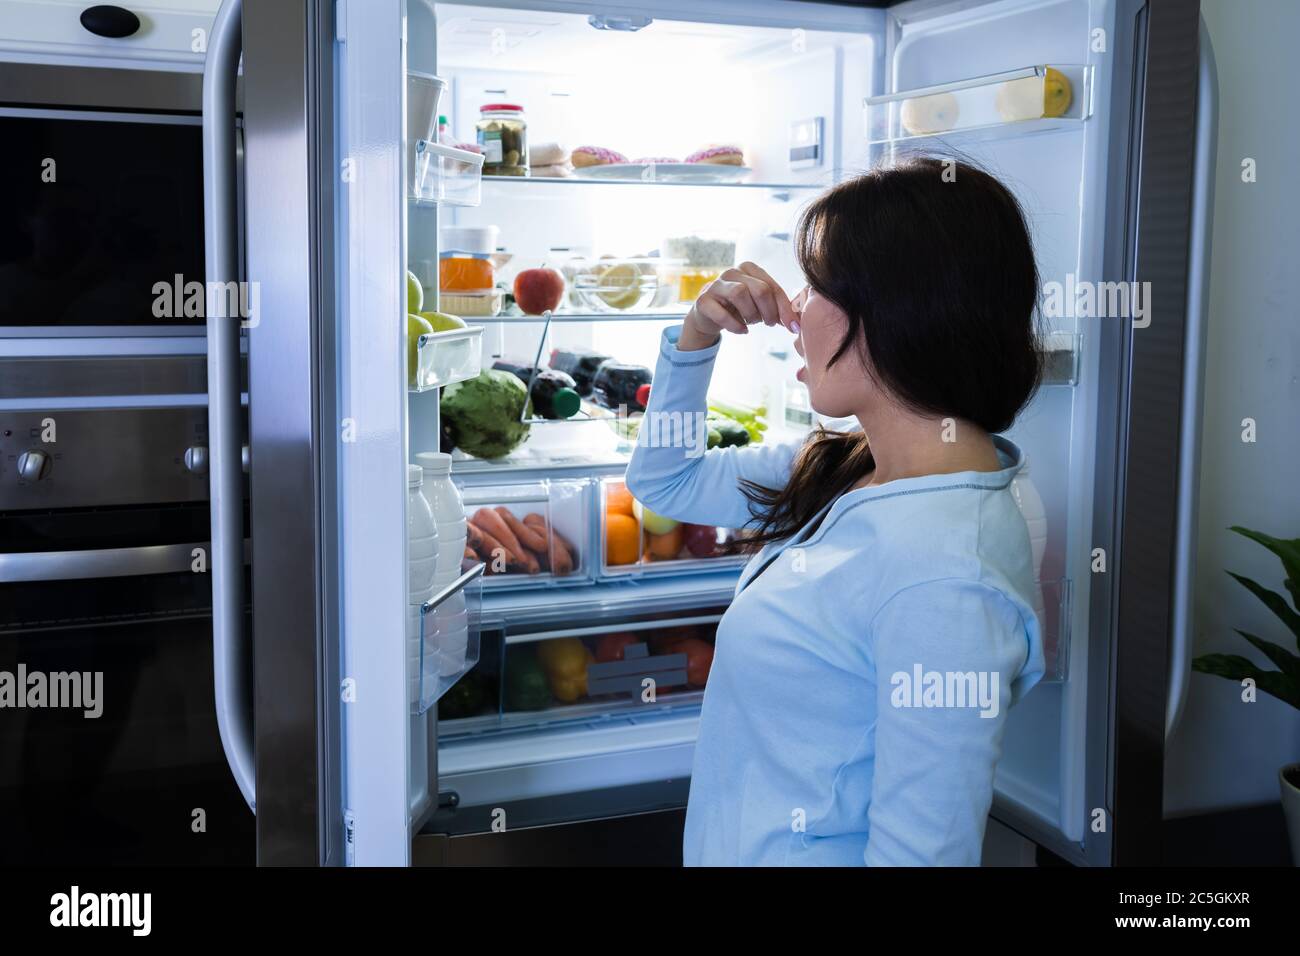 Rotten Food Bad Smell Or Stink In Refrigerator Or Fridge Stock Photo